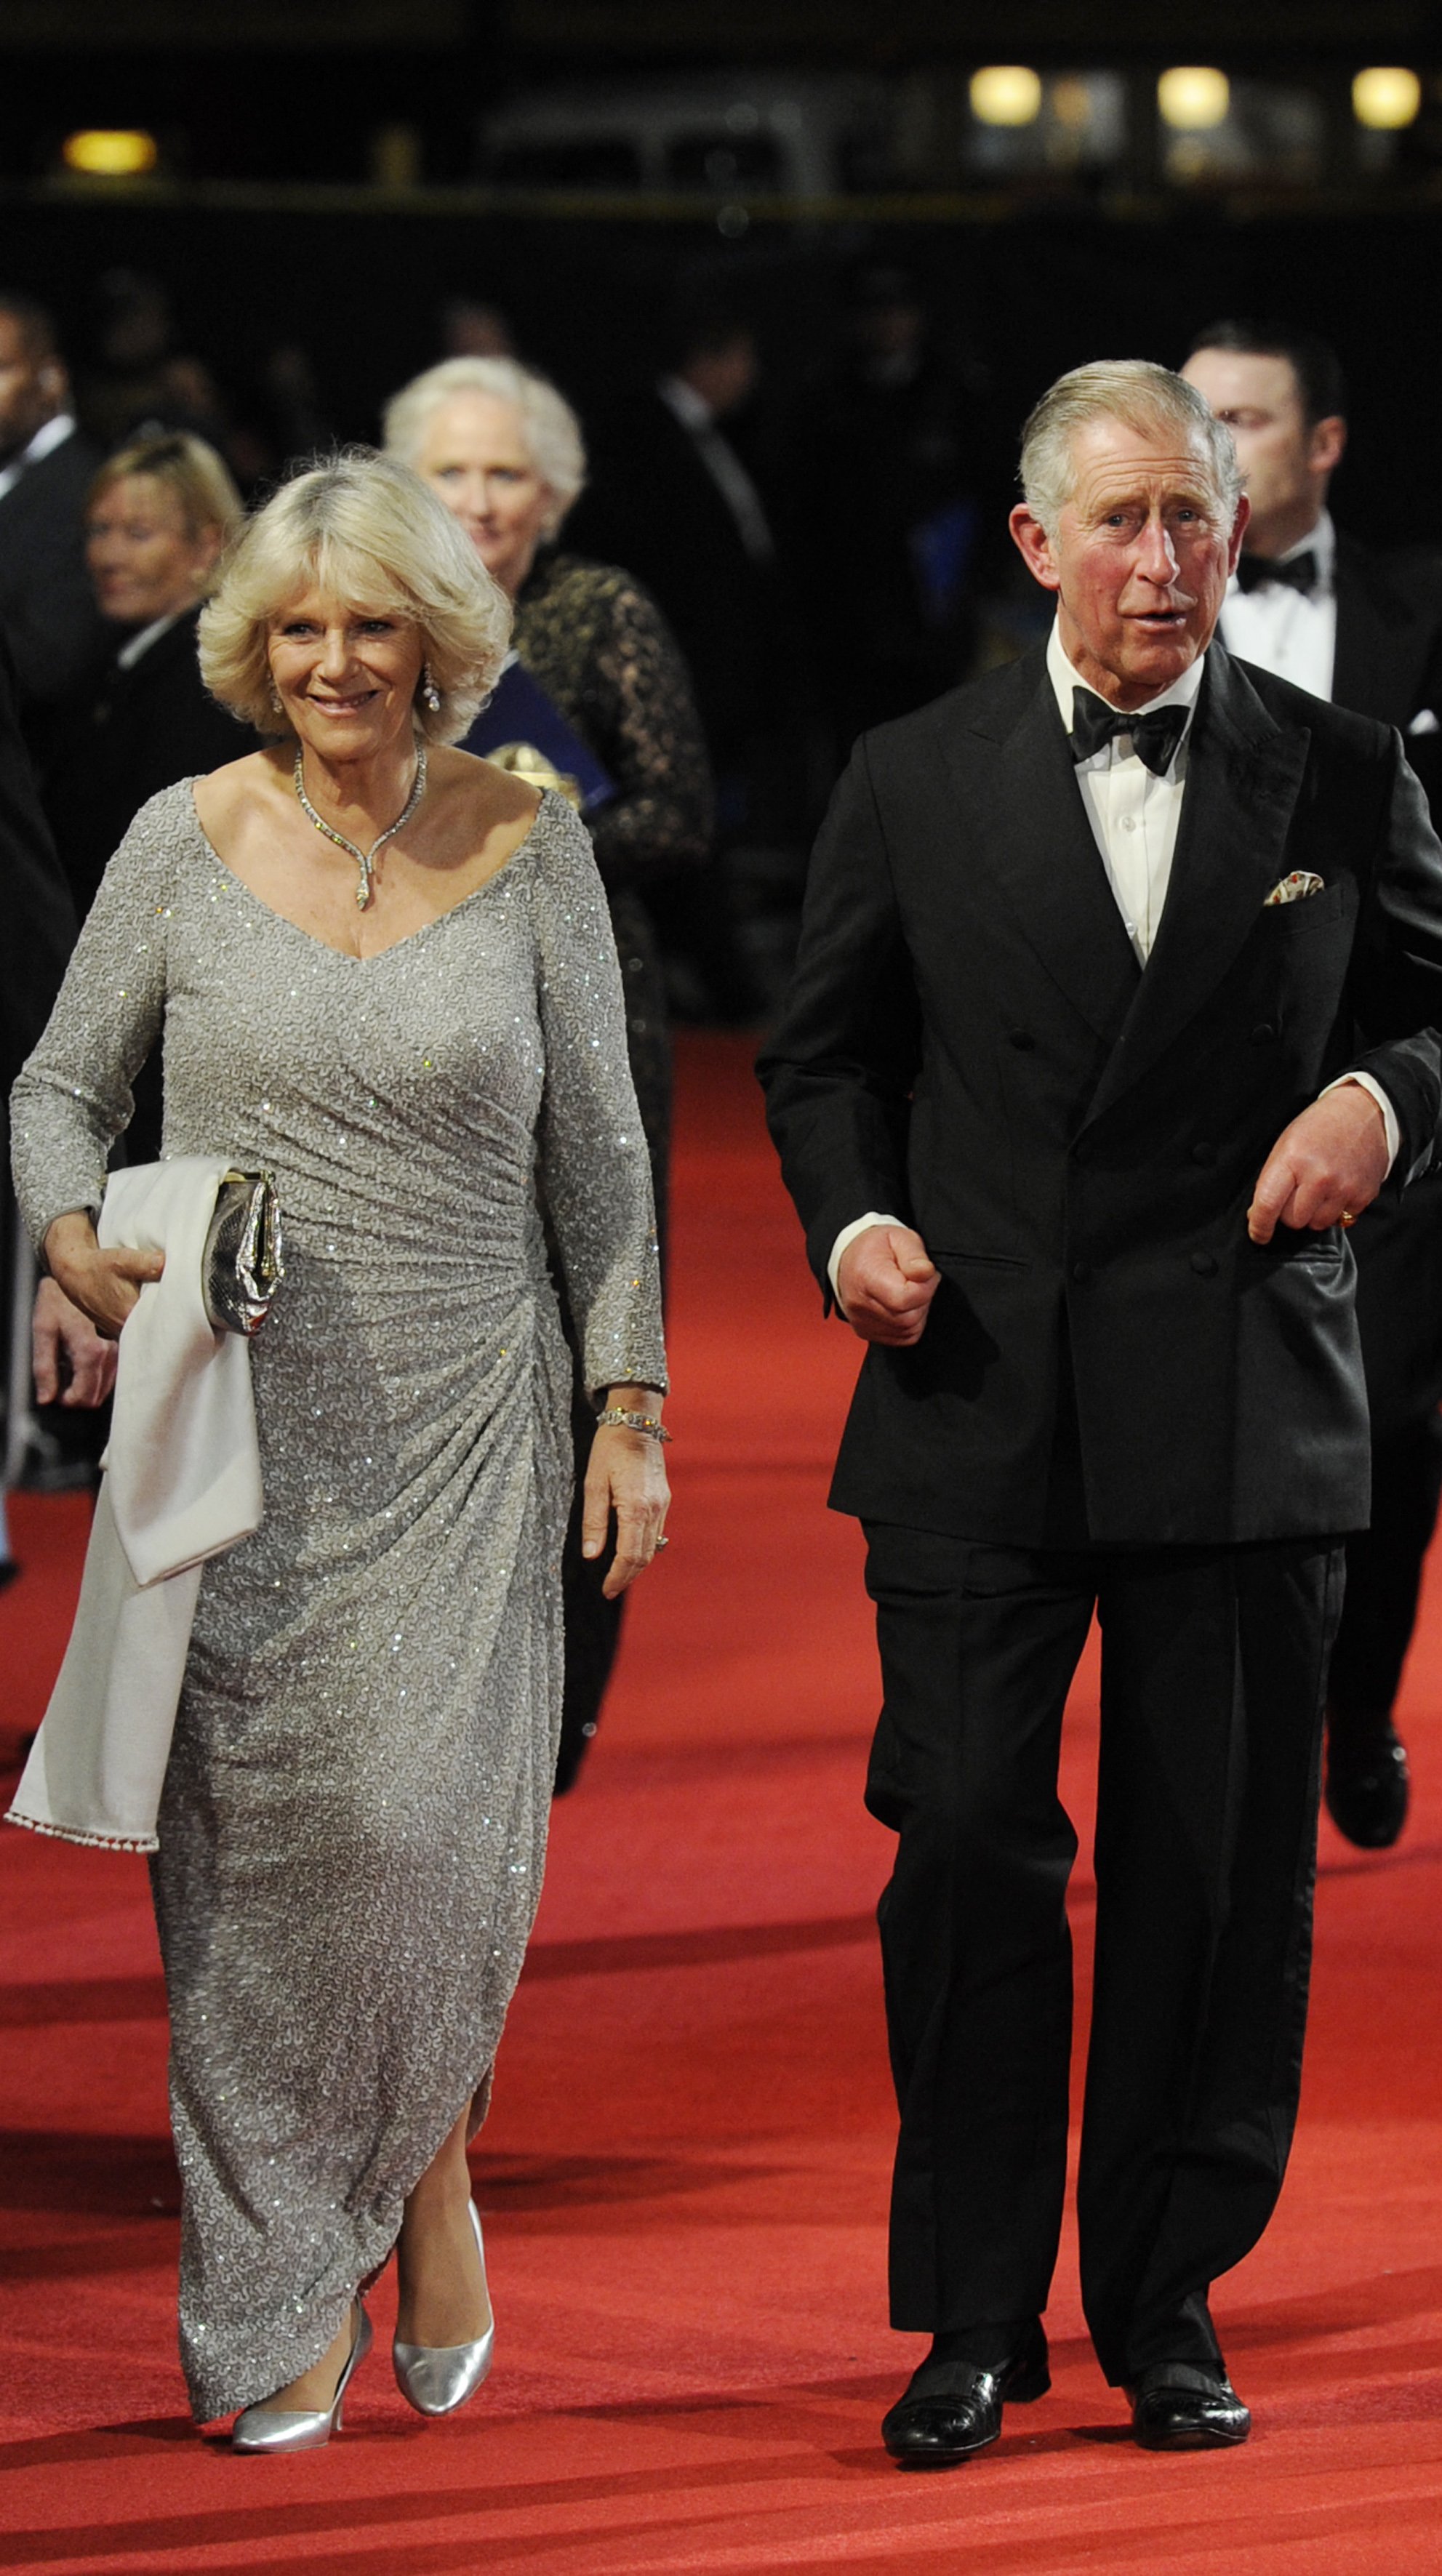 Prince Charles (Now King) and Camila arrive to to attend a Royal Film Performance of "Hugo" in 3D, in London, England on November 28, 2011 | Source: Getty Images